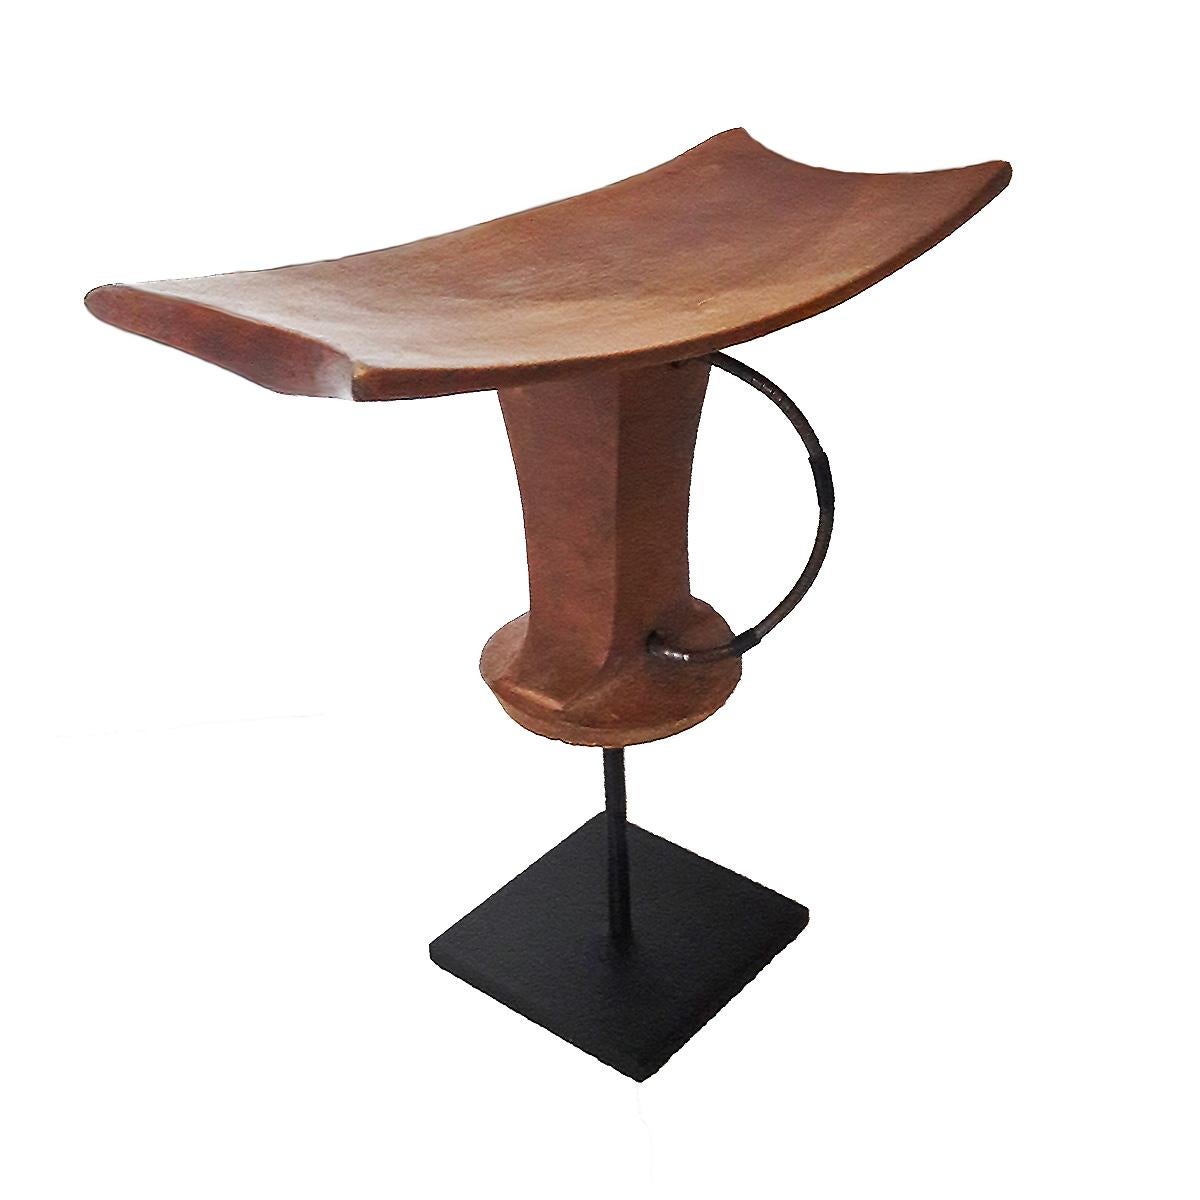 A headrest or stool, hand carved out of a single piece of teak wood and a metal carrying cord. From Ethiopia, late 20th century. Mounted on a black metal stand.